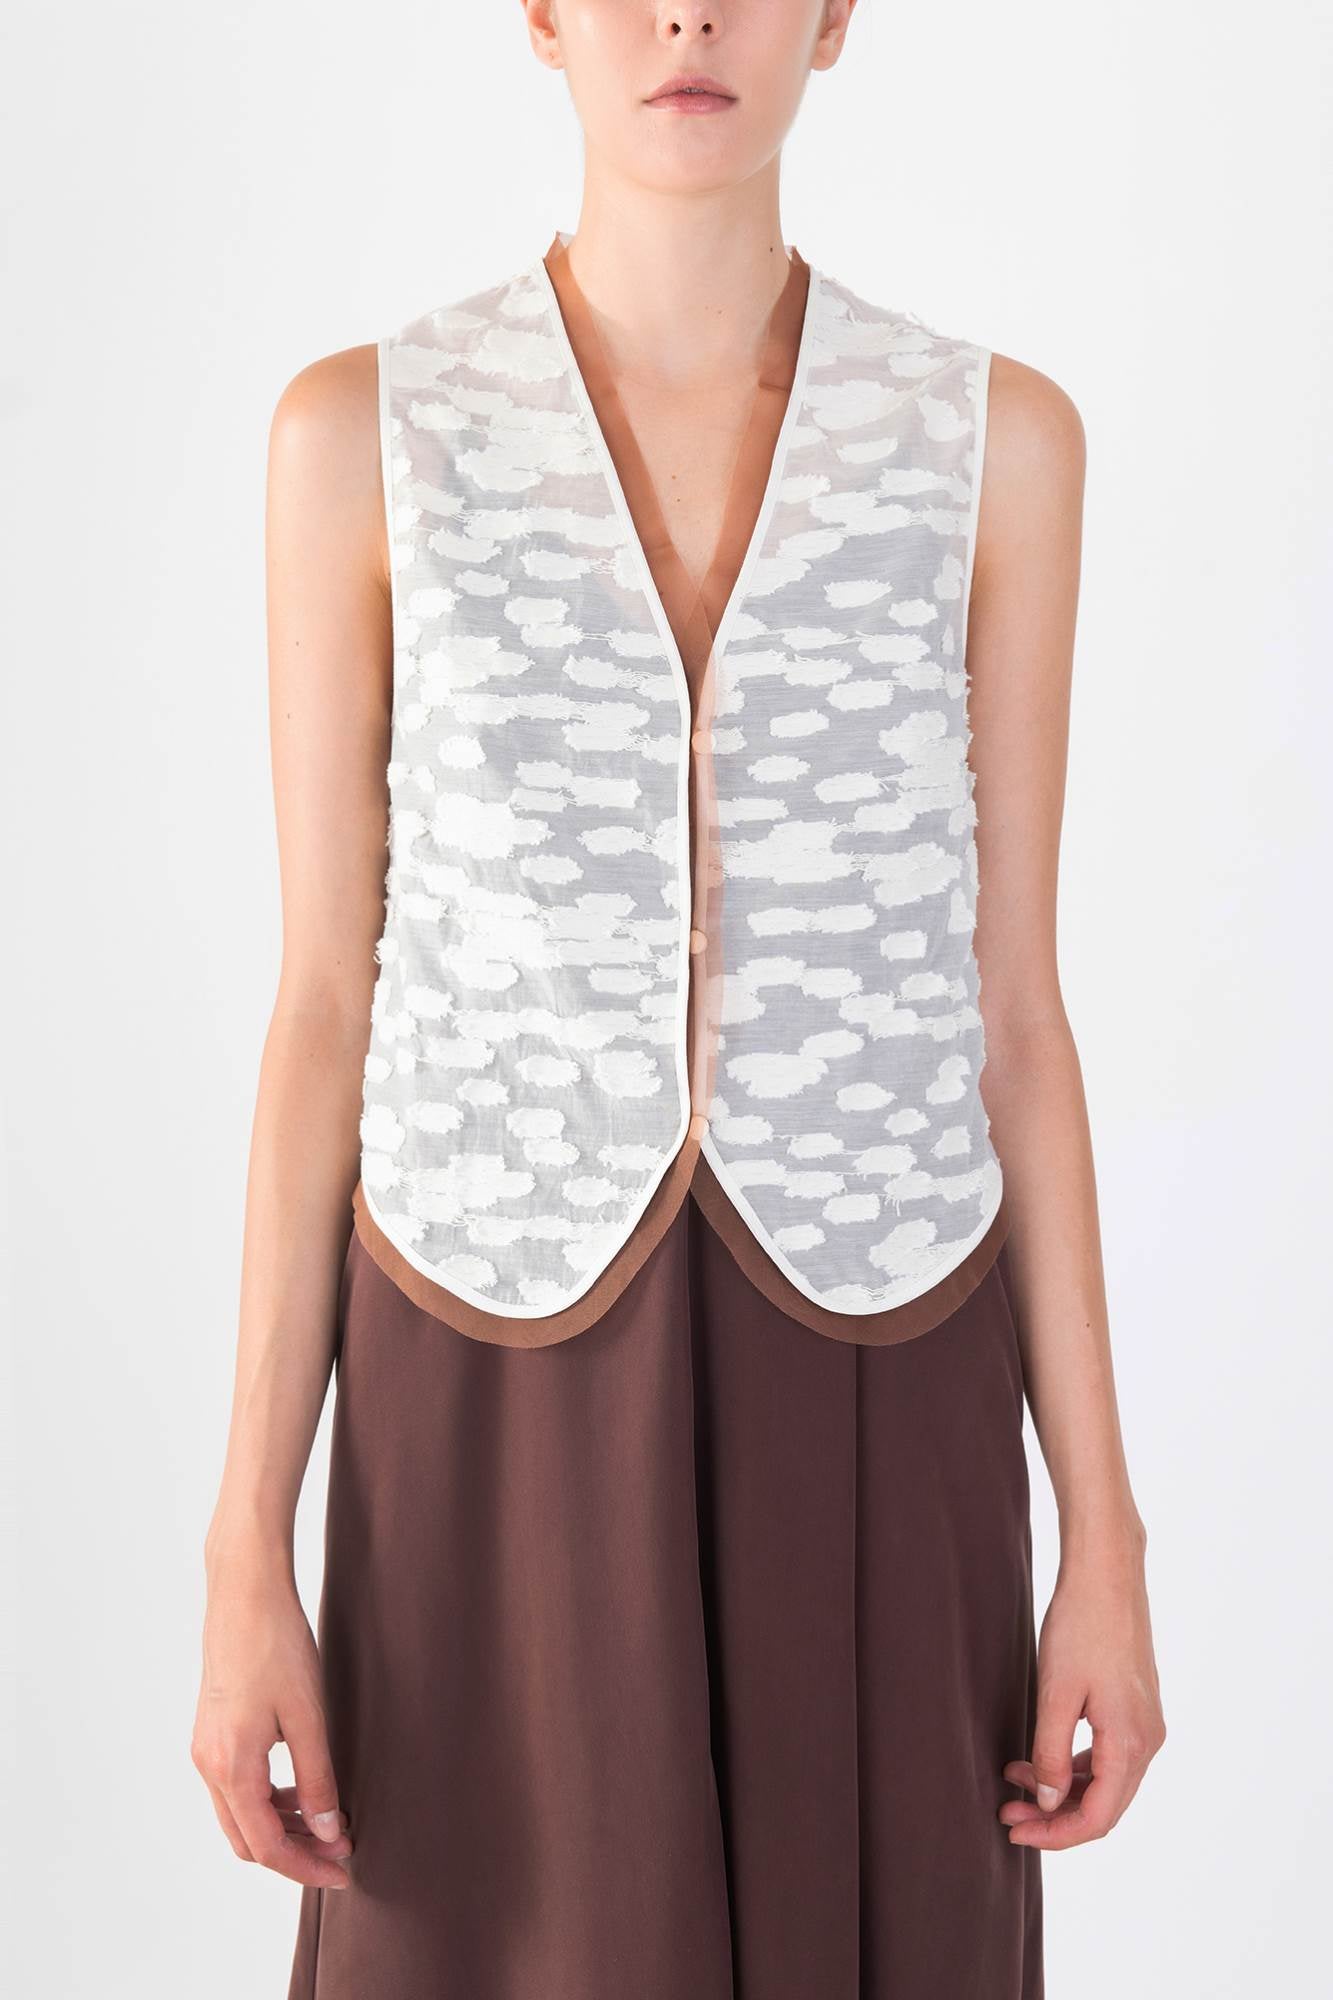 Fil coupé waistcoat with contrasting piping detail